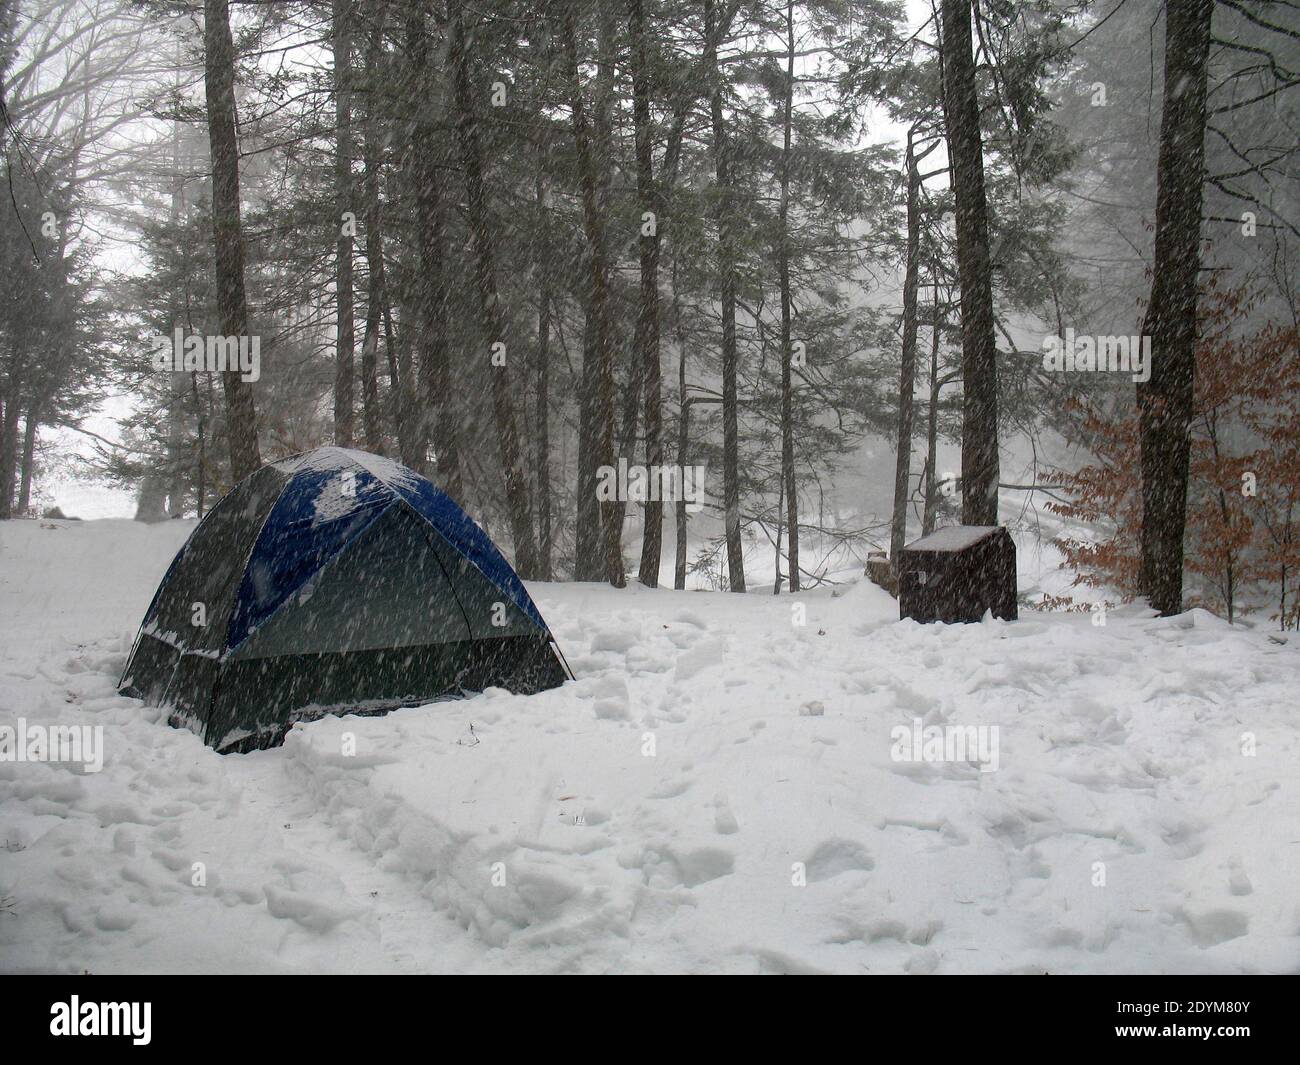 5 Tips for Camping in the Snow - Wildland Trekking Blog